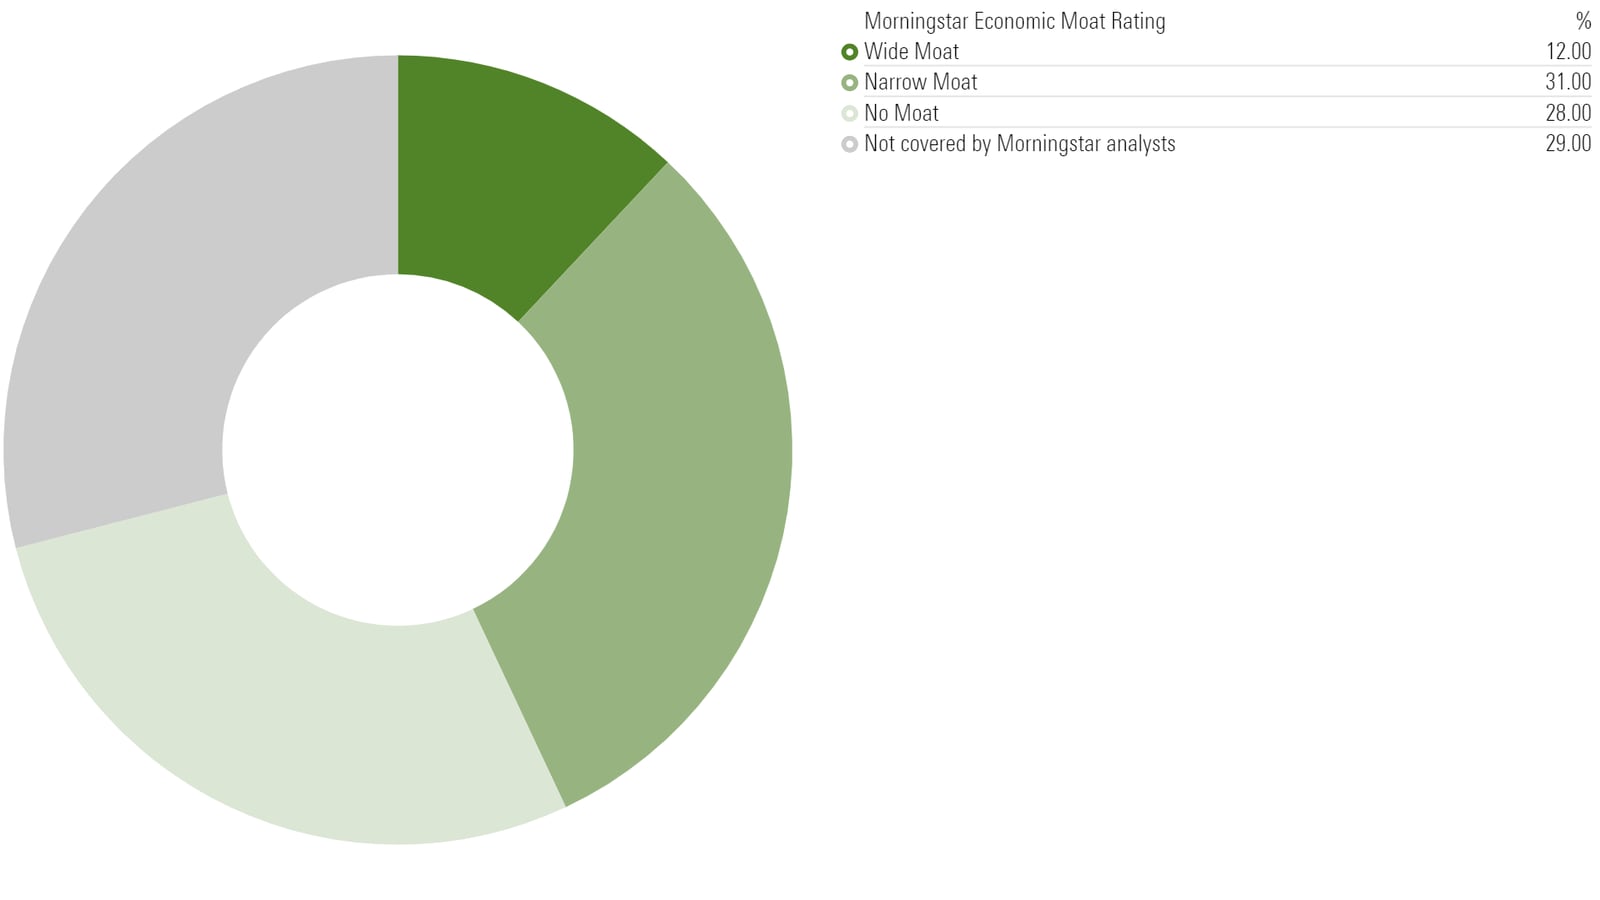 Pie chart showing percentage of wide, narrow, and no moat stocks in the Morningstar US Market Index.